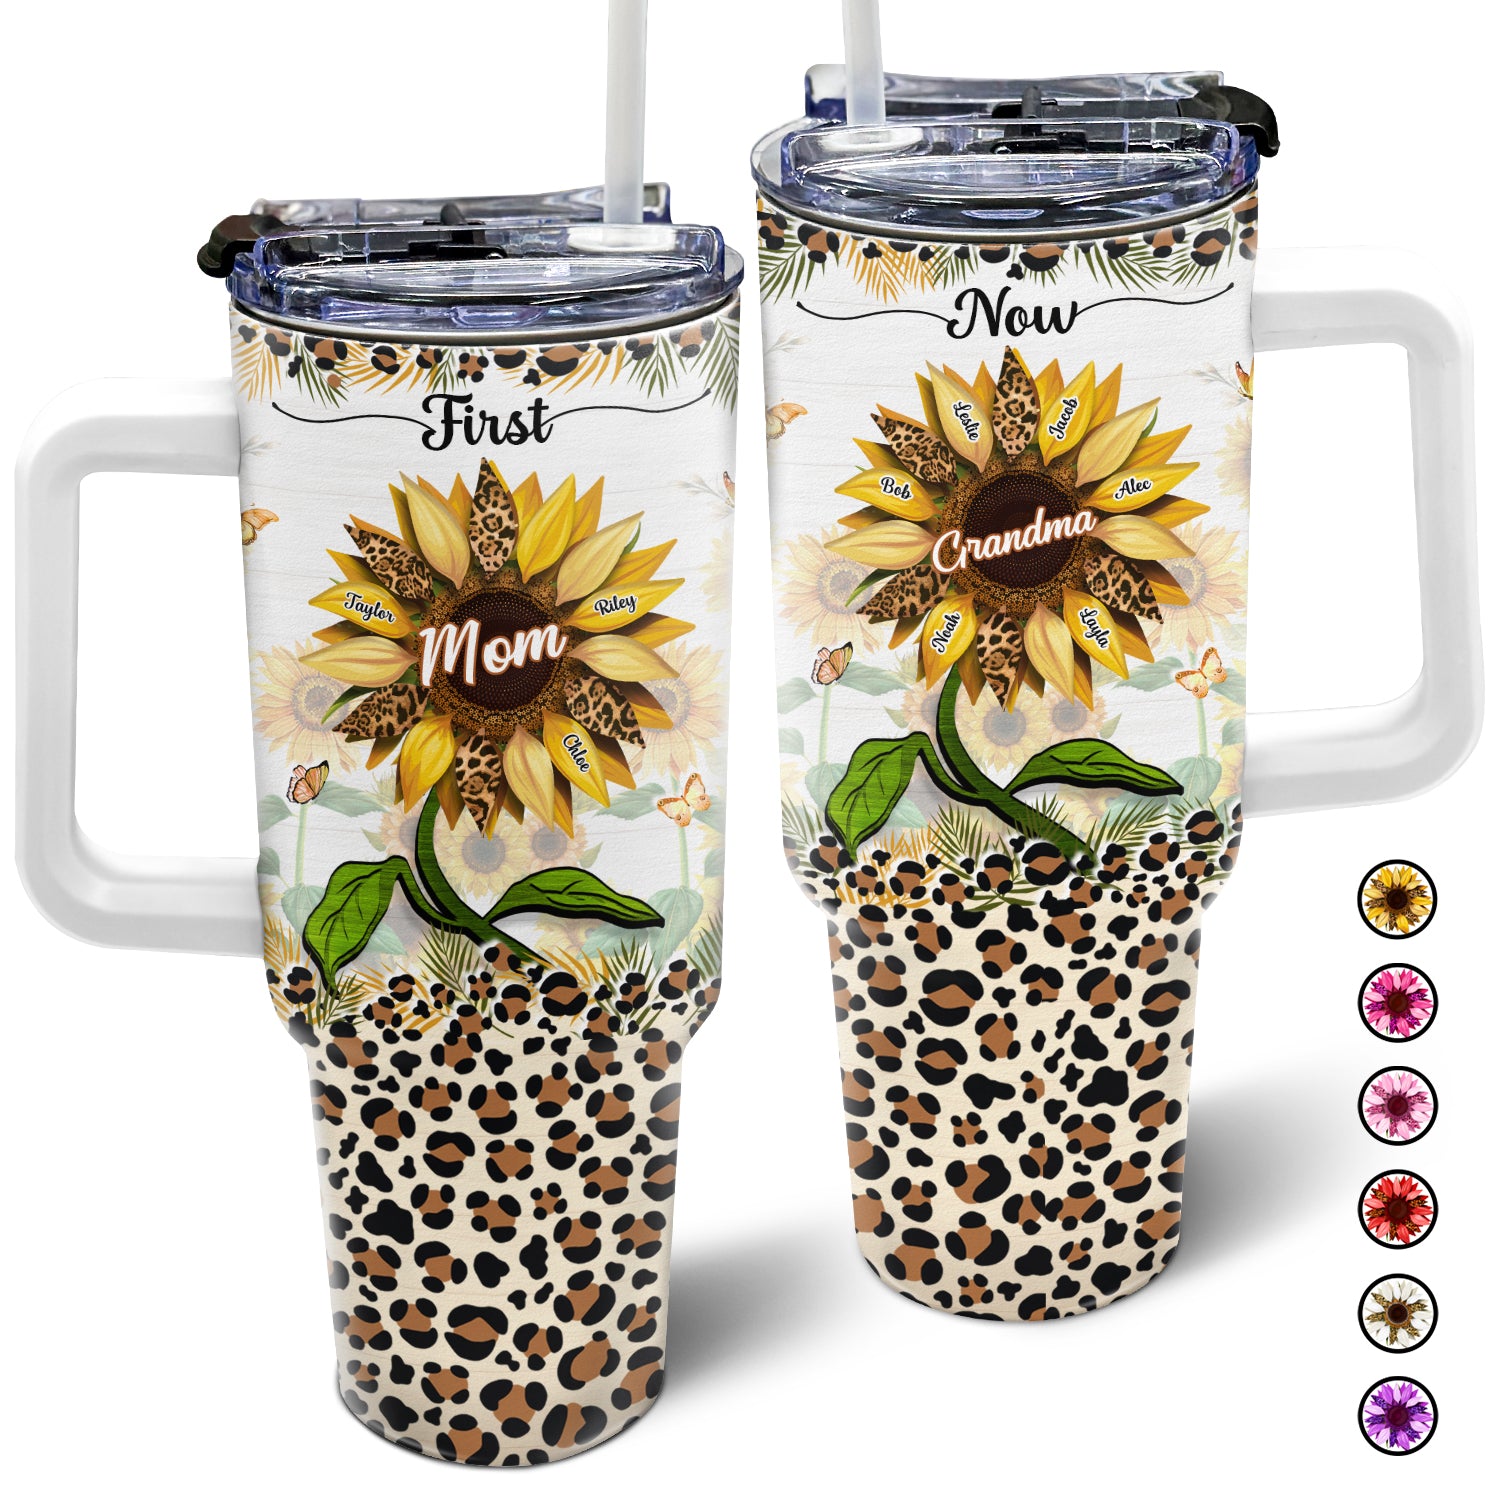 First Mom Now Grandma - Gift For Mothers, Grandmas, Aunties - Personalized 40oz Tumbler With Straw